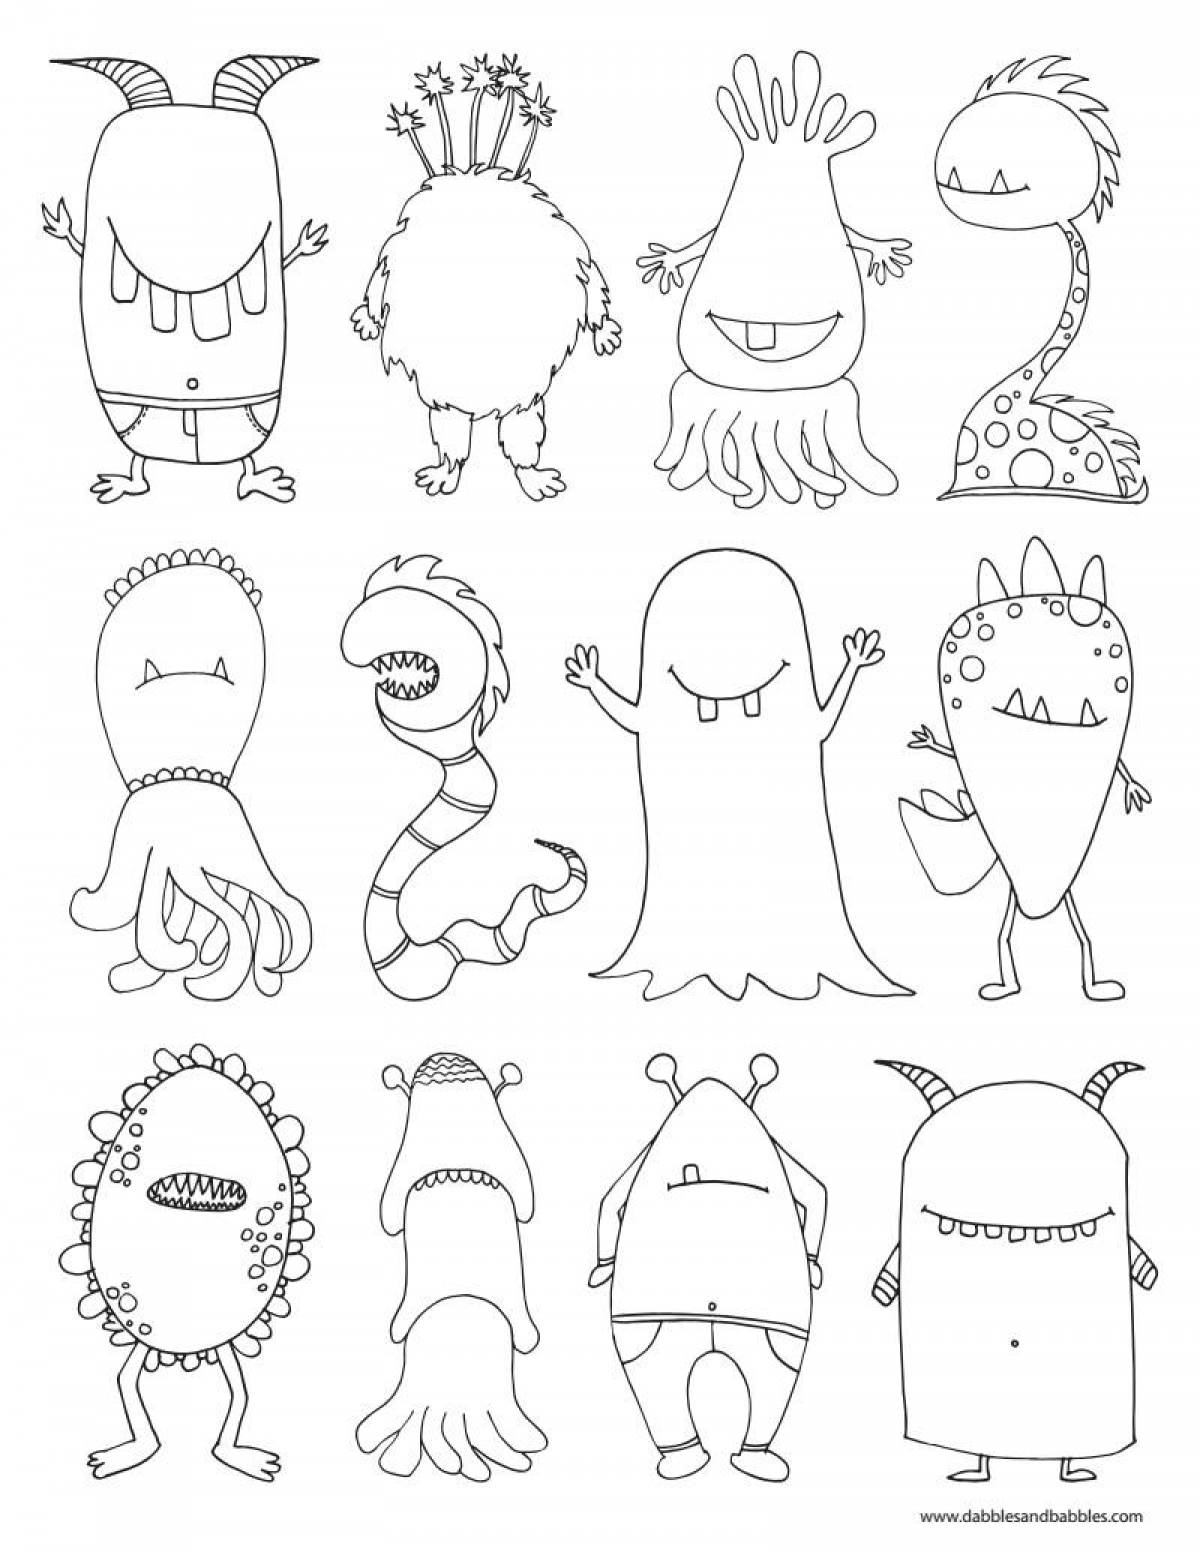 Weird monster coloring pages